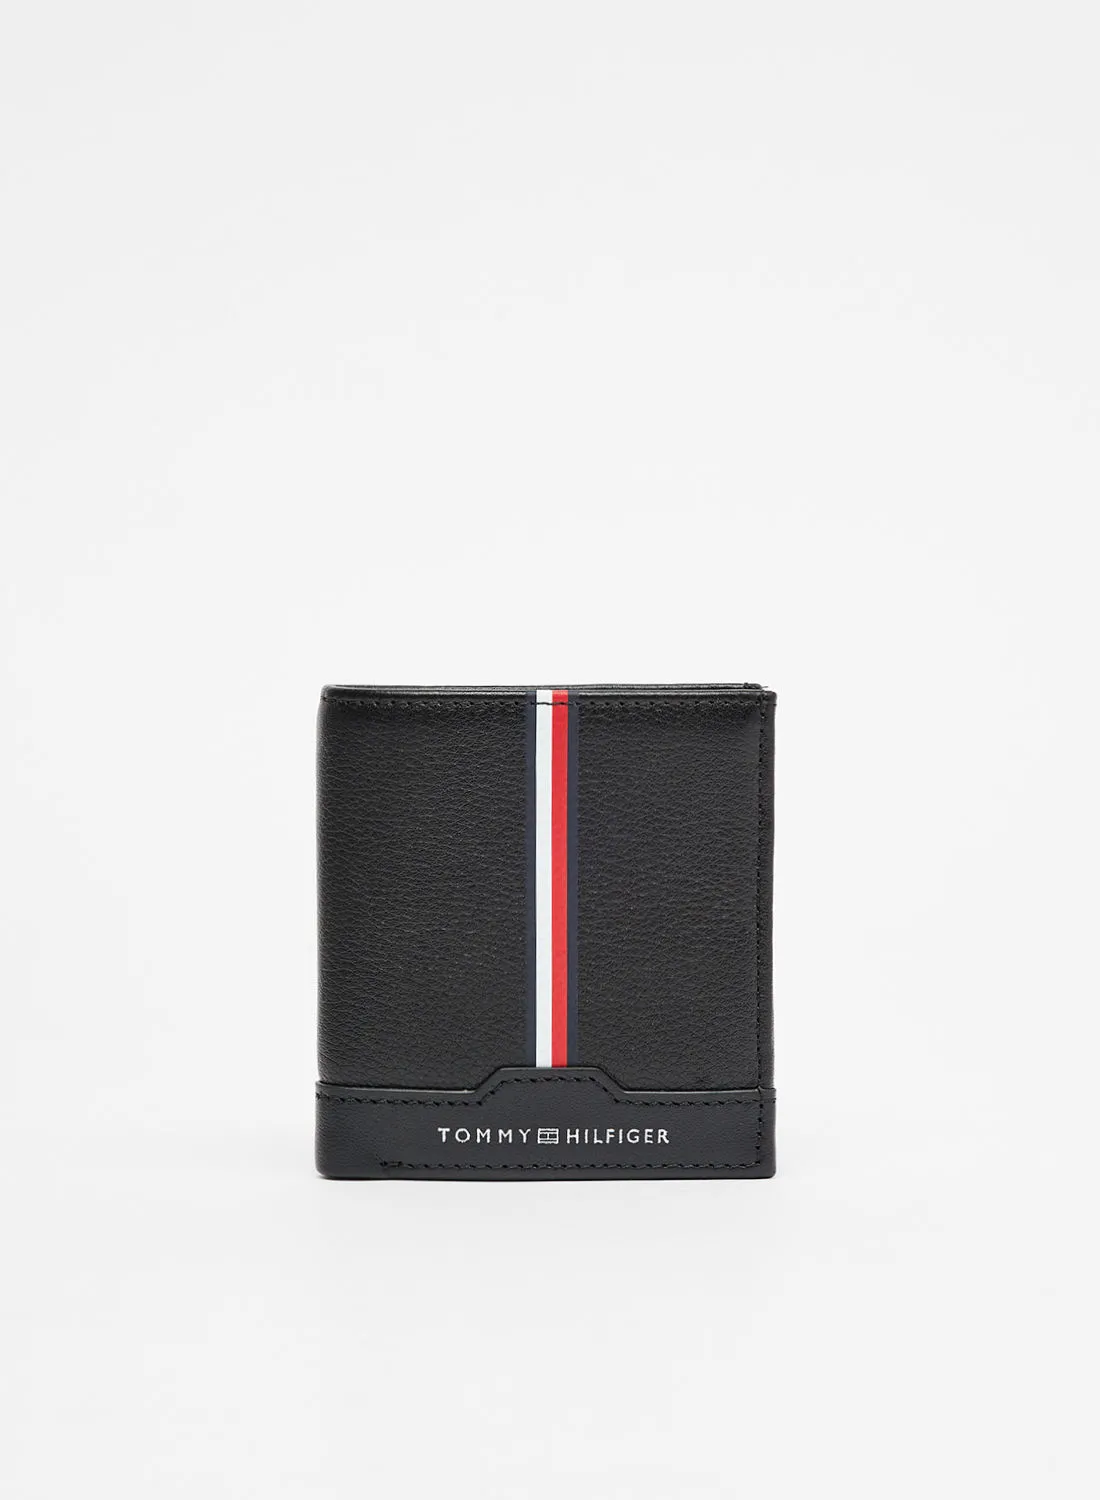 TOMMY HILFIGER Downtown Trifold Wallet